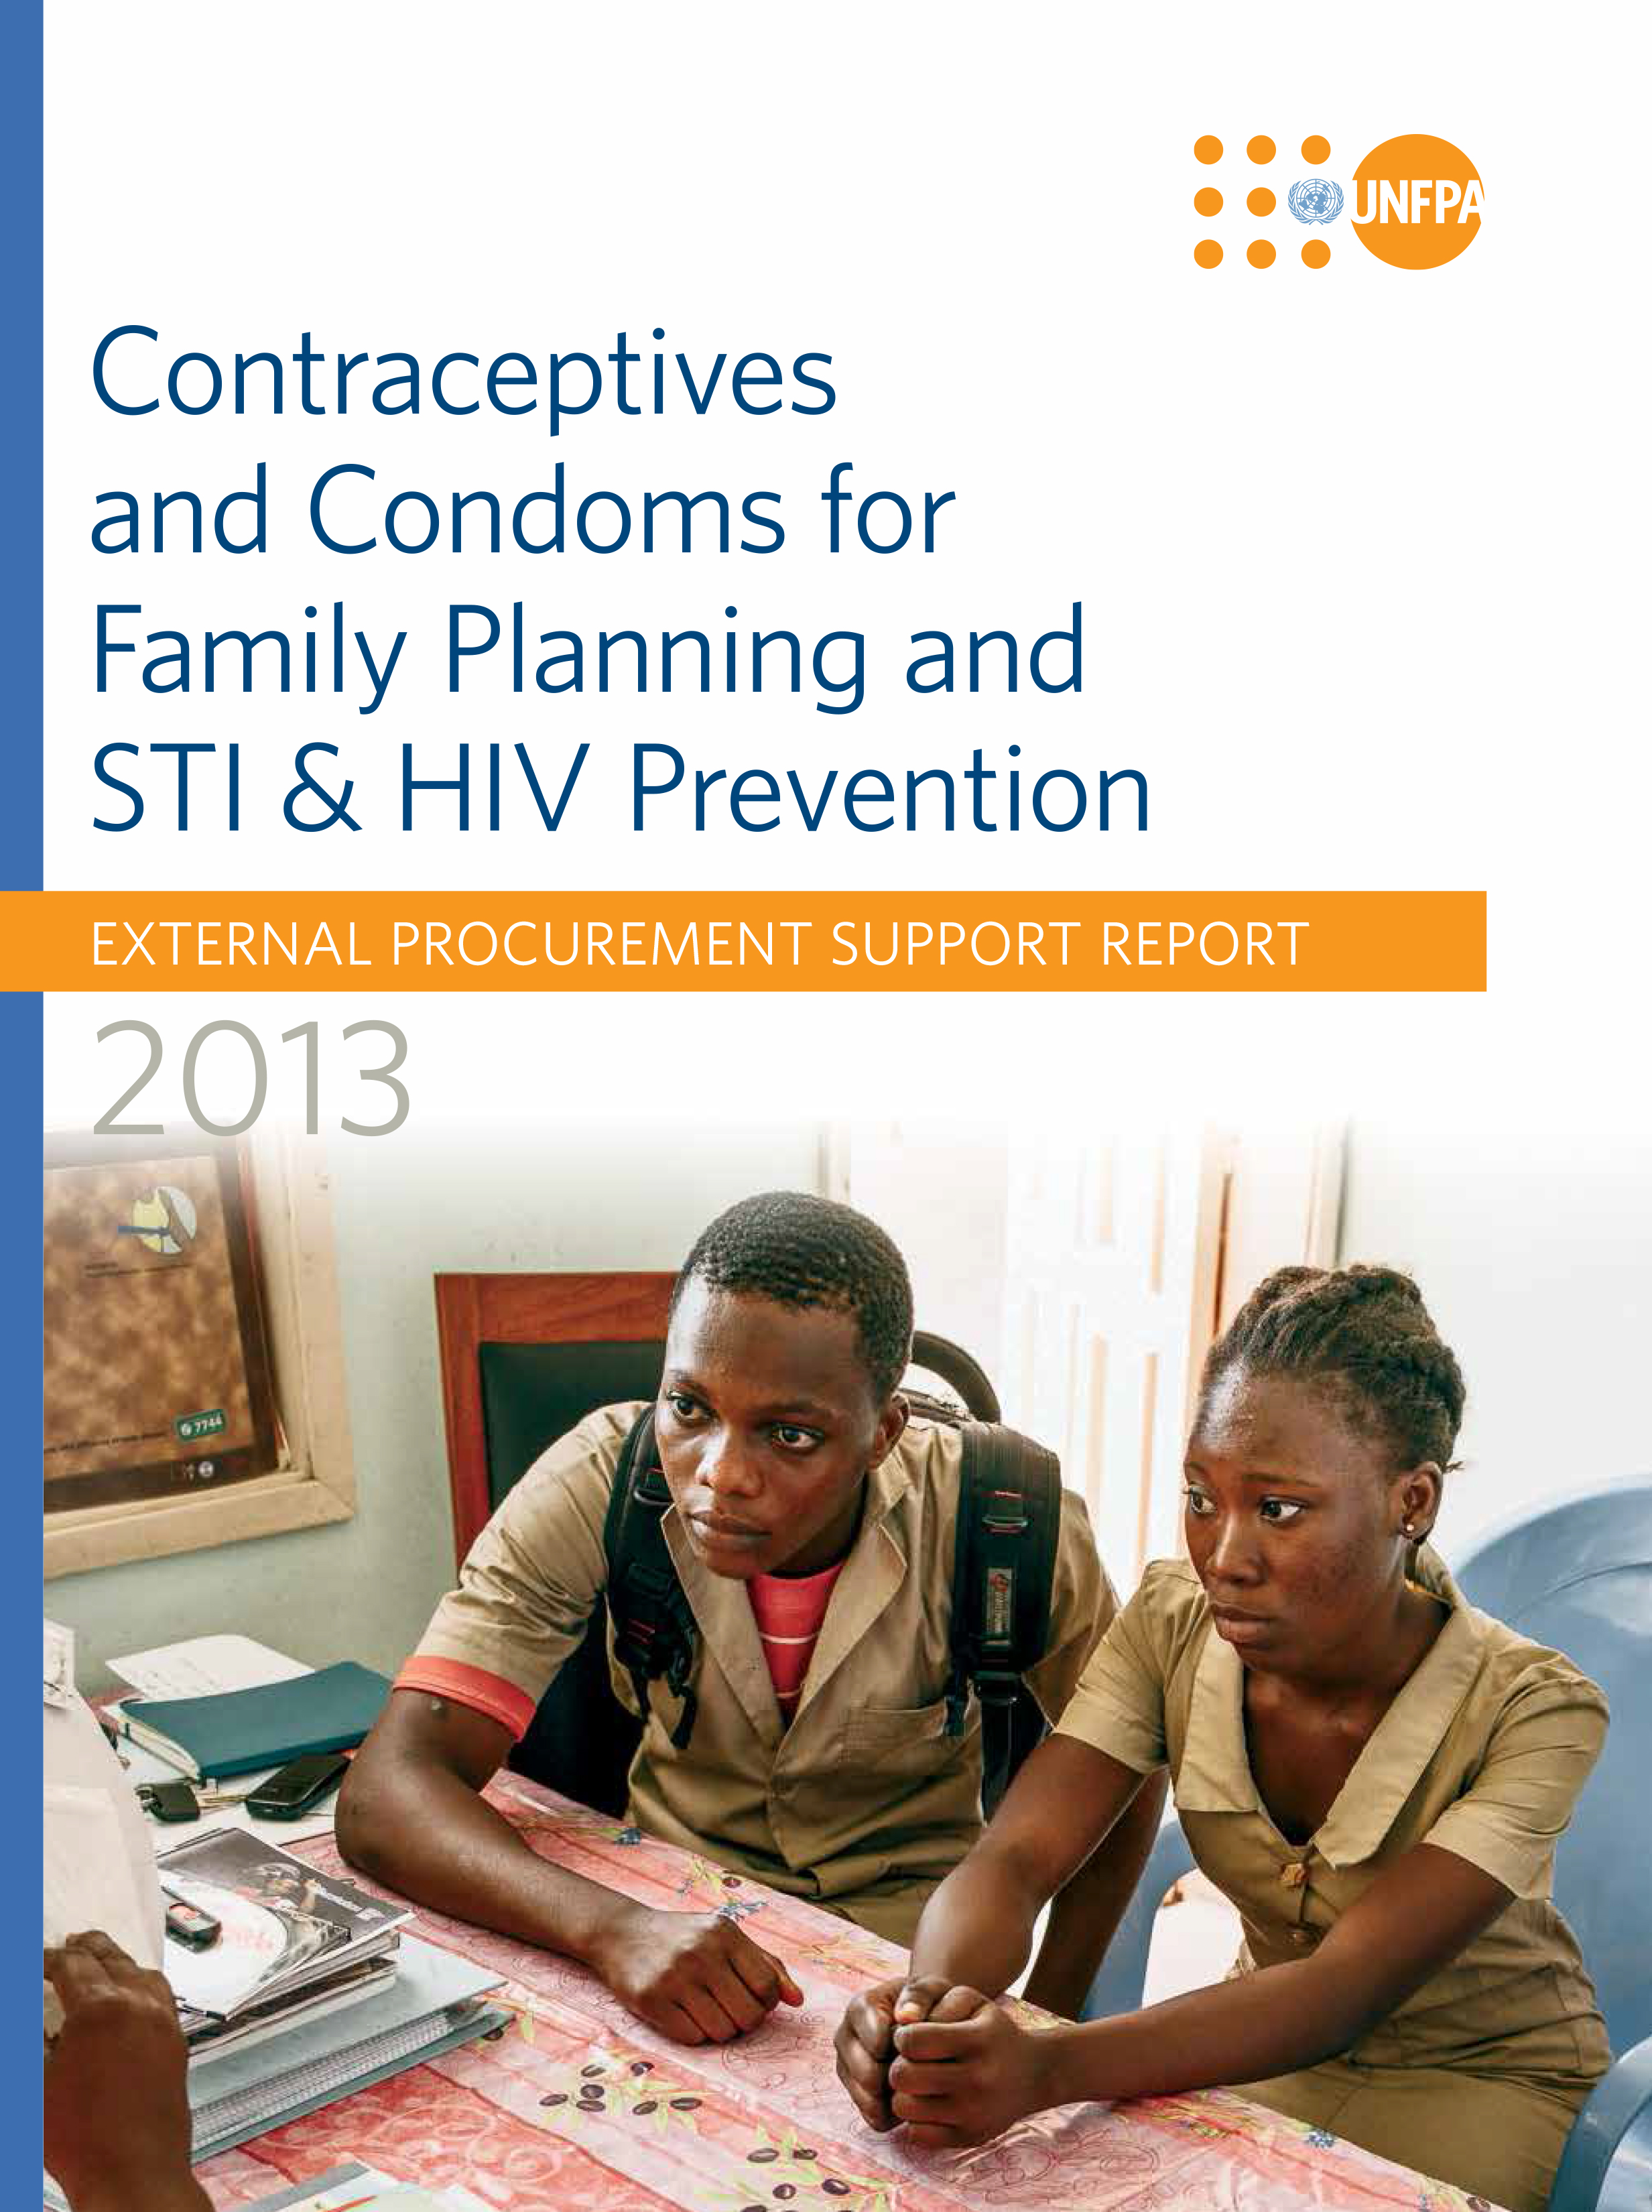 Contraceptives and Condoms for Family Planning and STI/HIV Prevention: External Procurement Support Report 2013